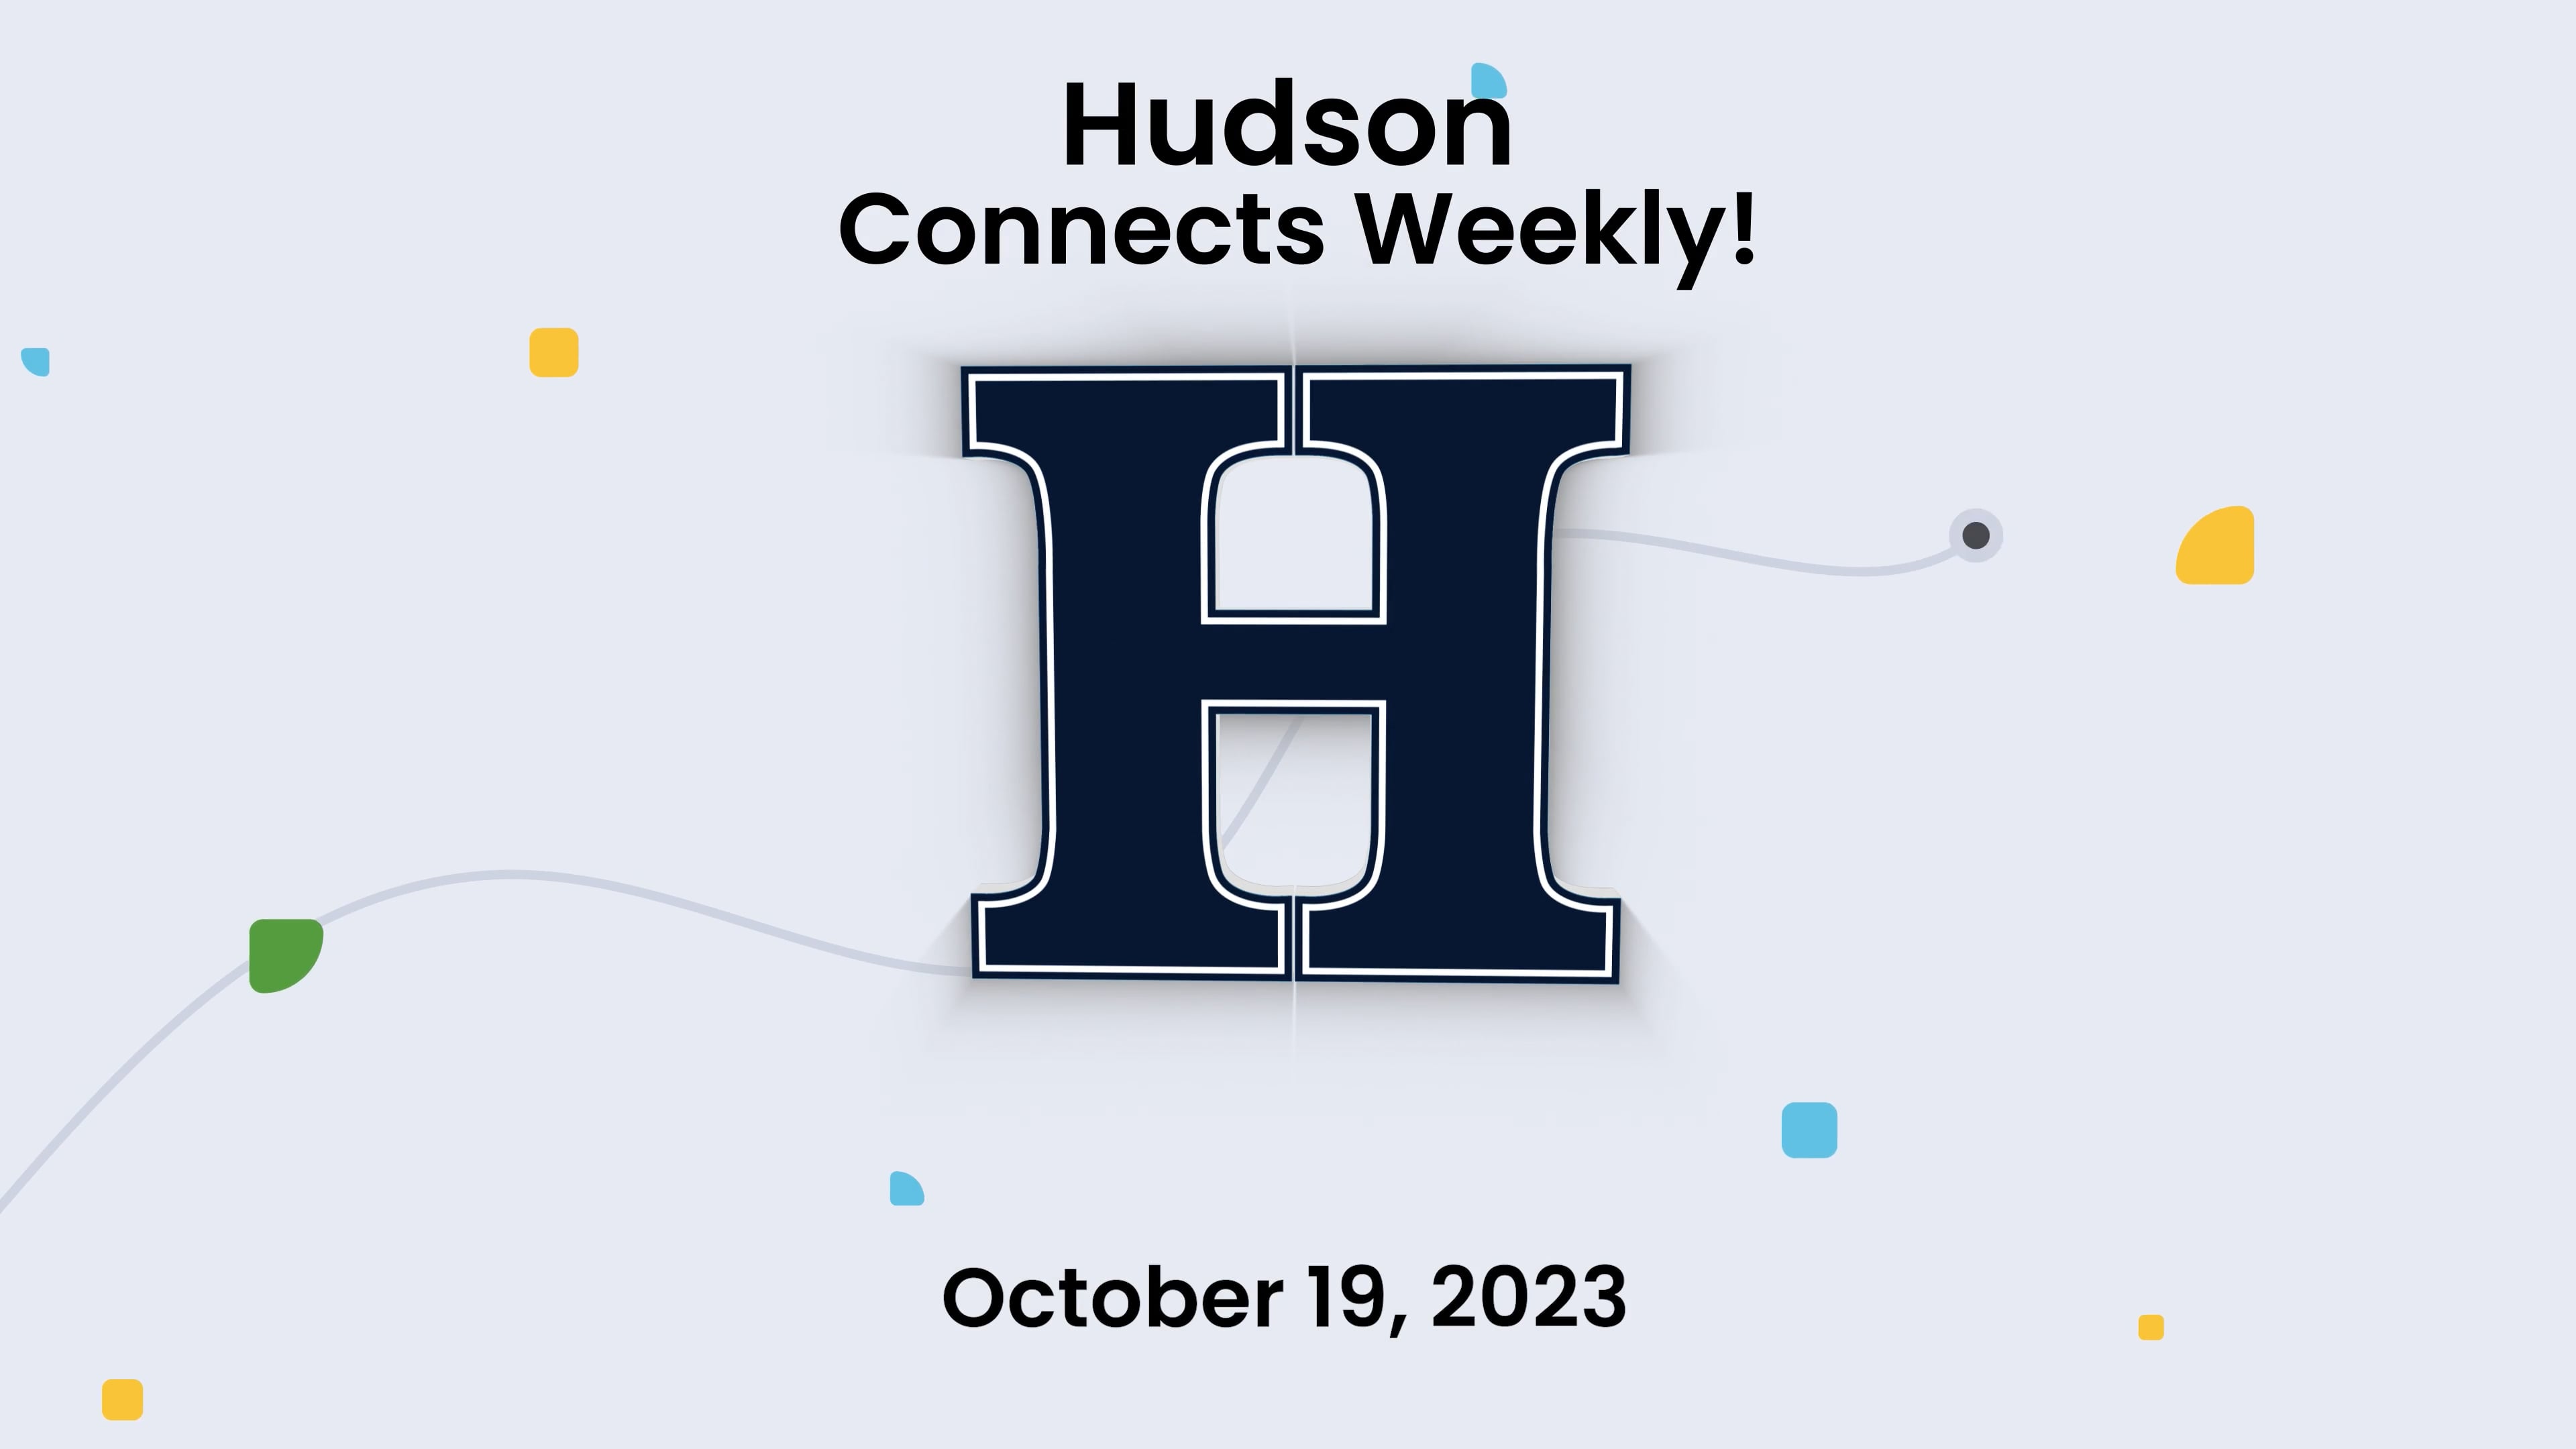 Hudson Connects Weekly - October 19, 2023